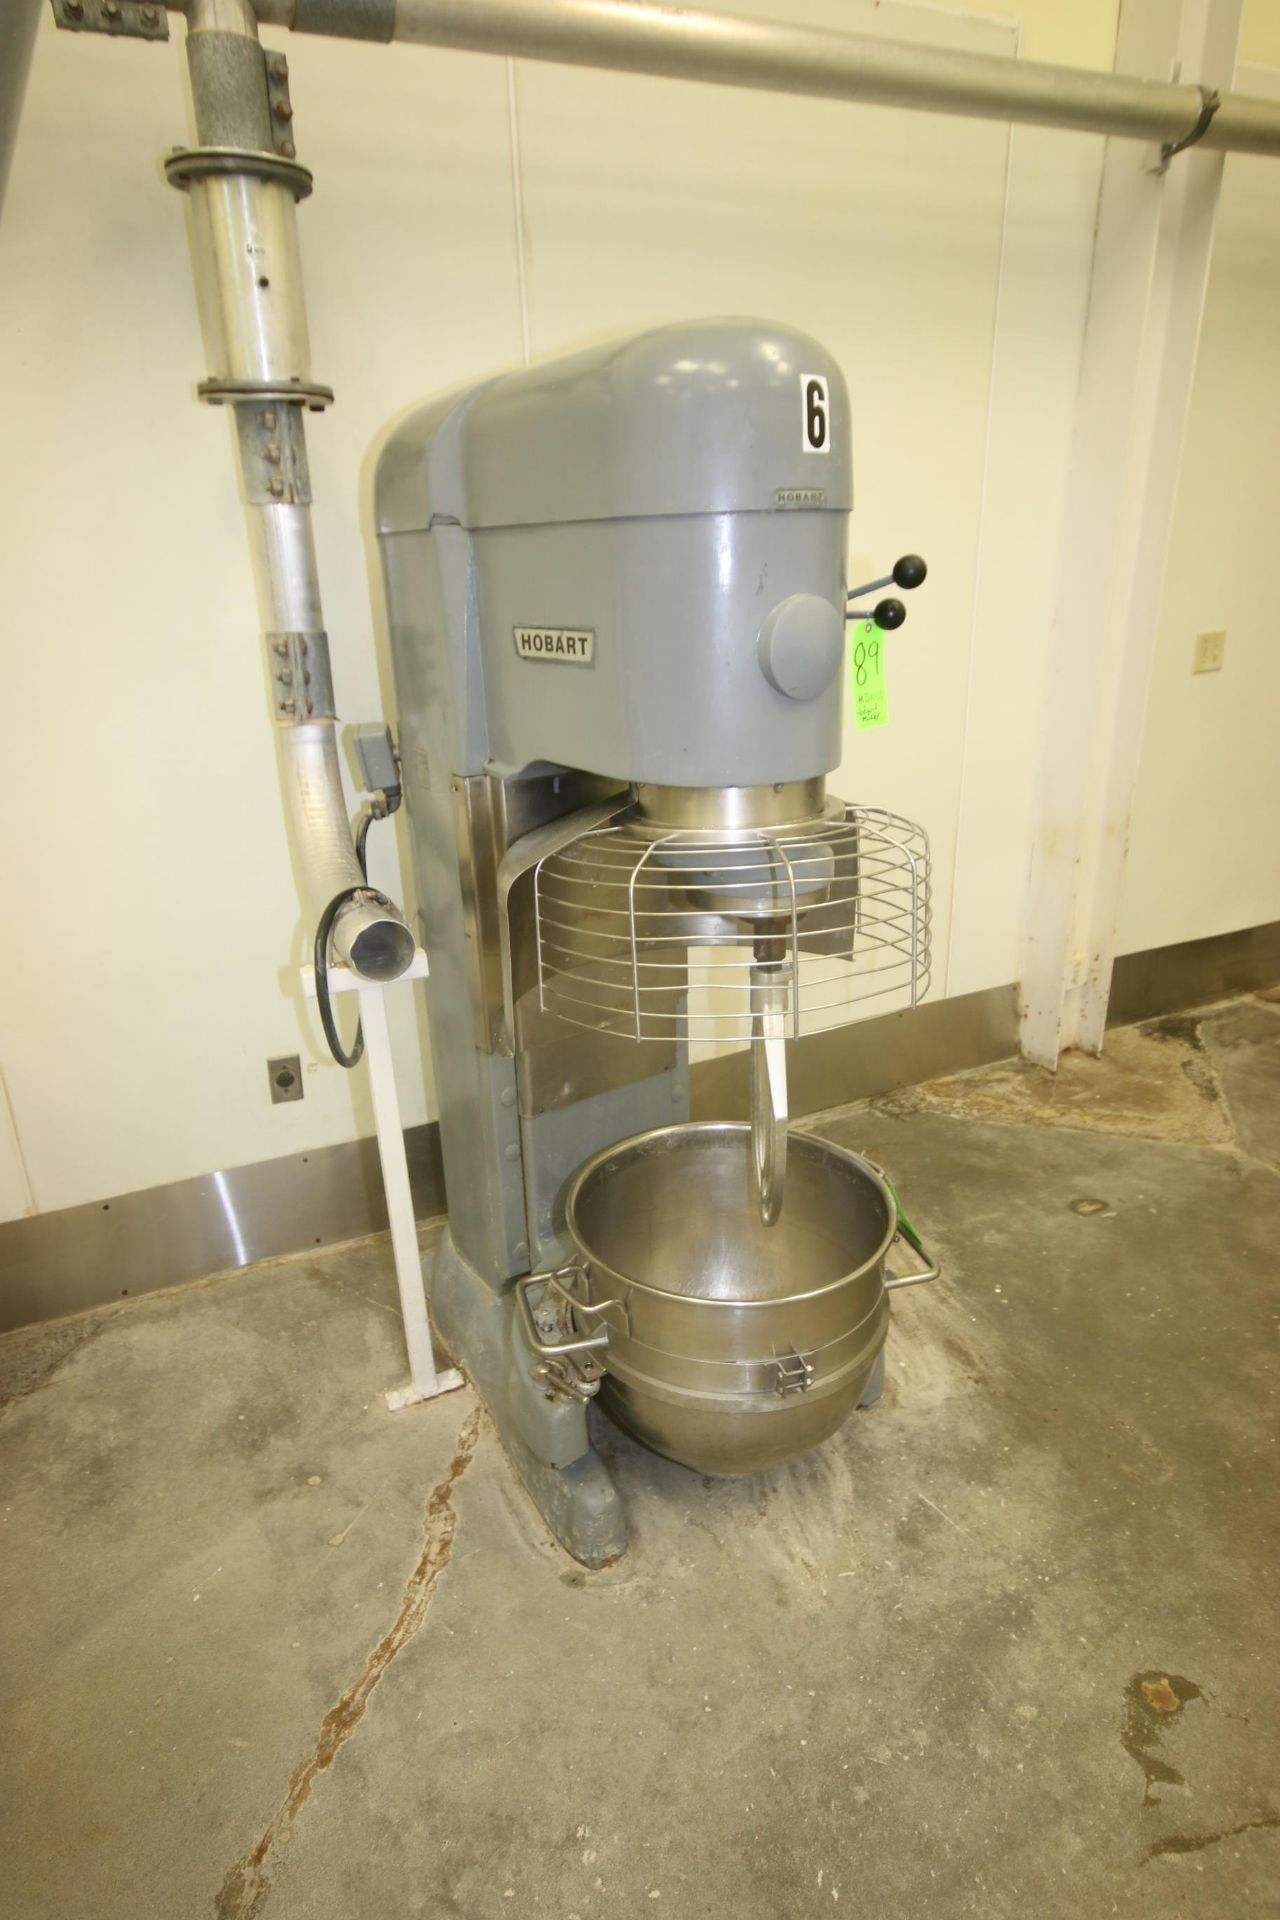 Hobart Mixer, M/N V1401, S/N 31-1220-328, 230 Volts, 3 Phase, with S/S Mixing Bowl, with S/S - Image 2 of 6